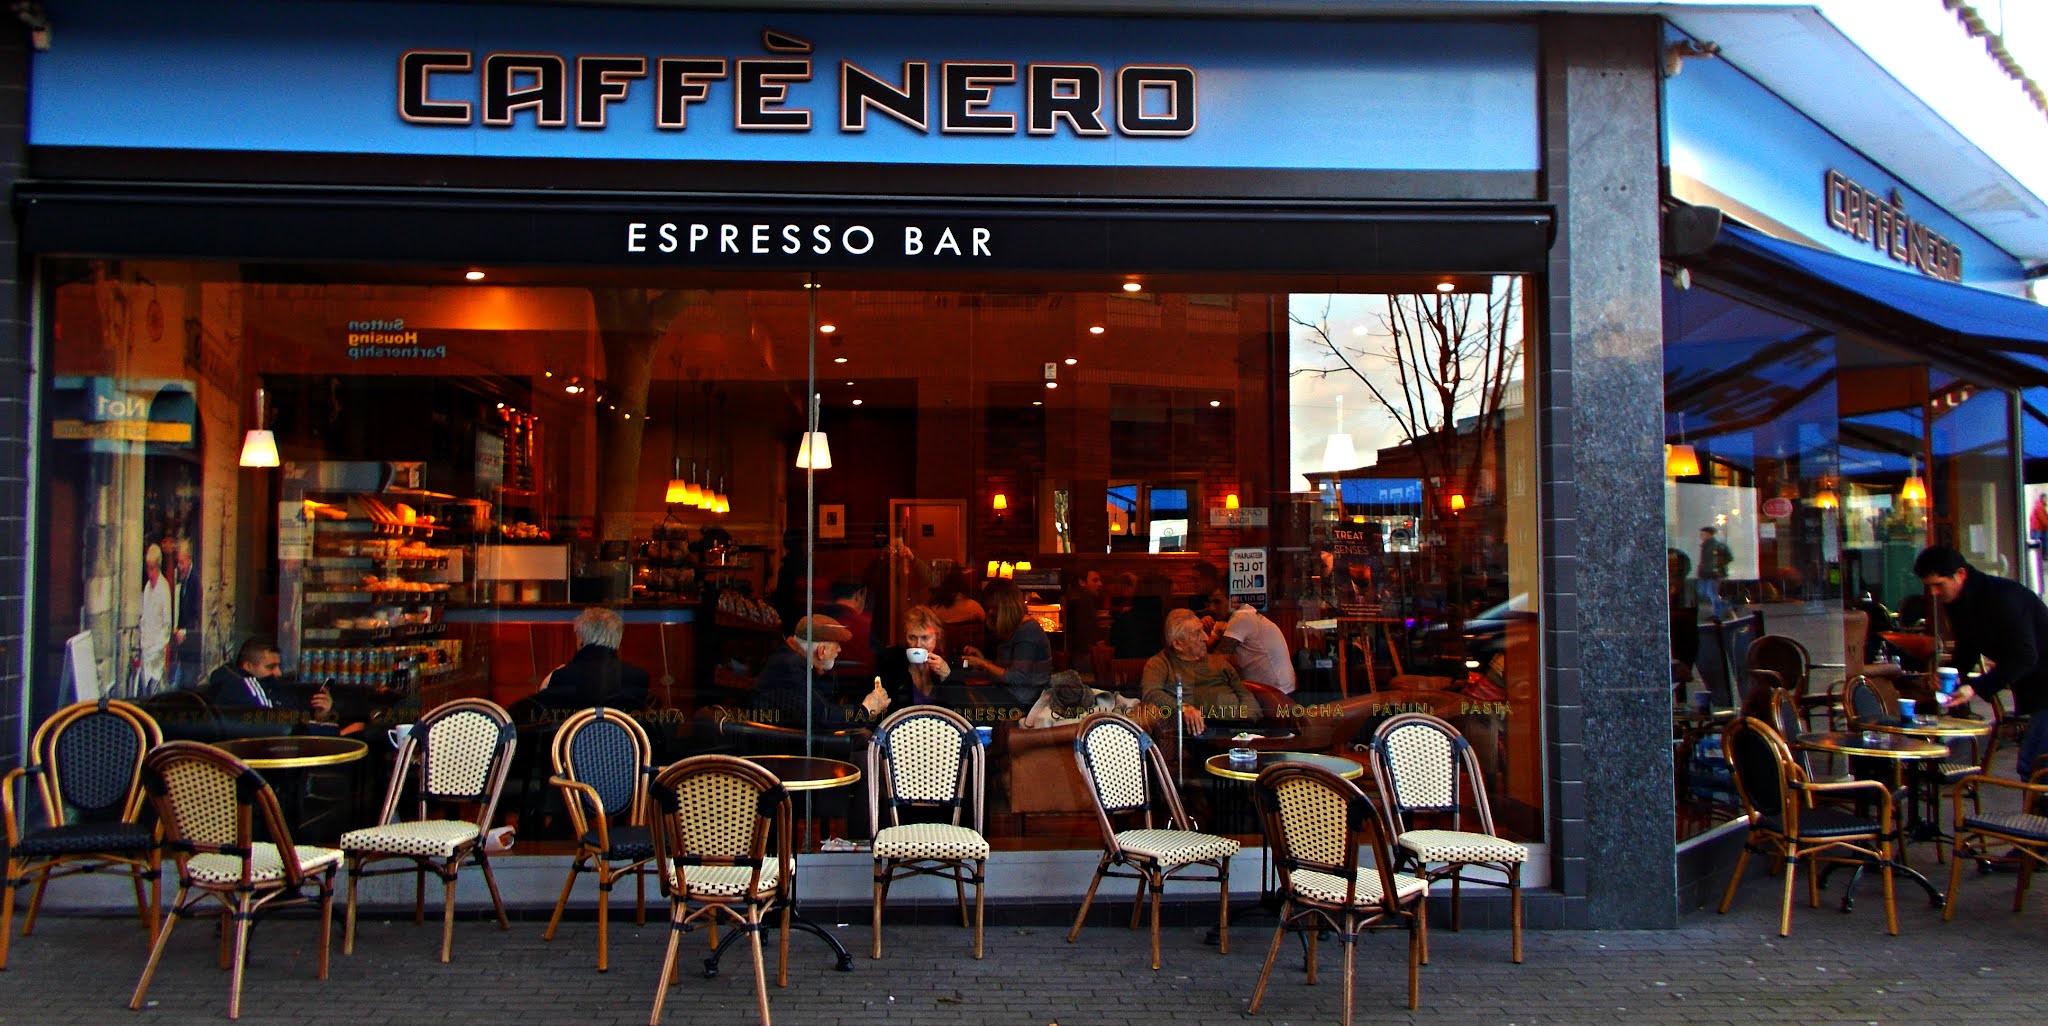 caffe nero interview questions and answers